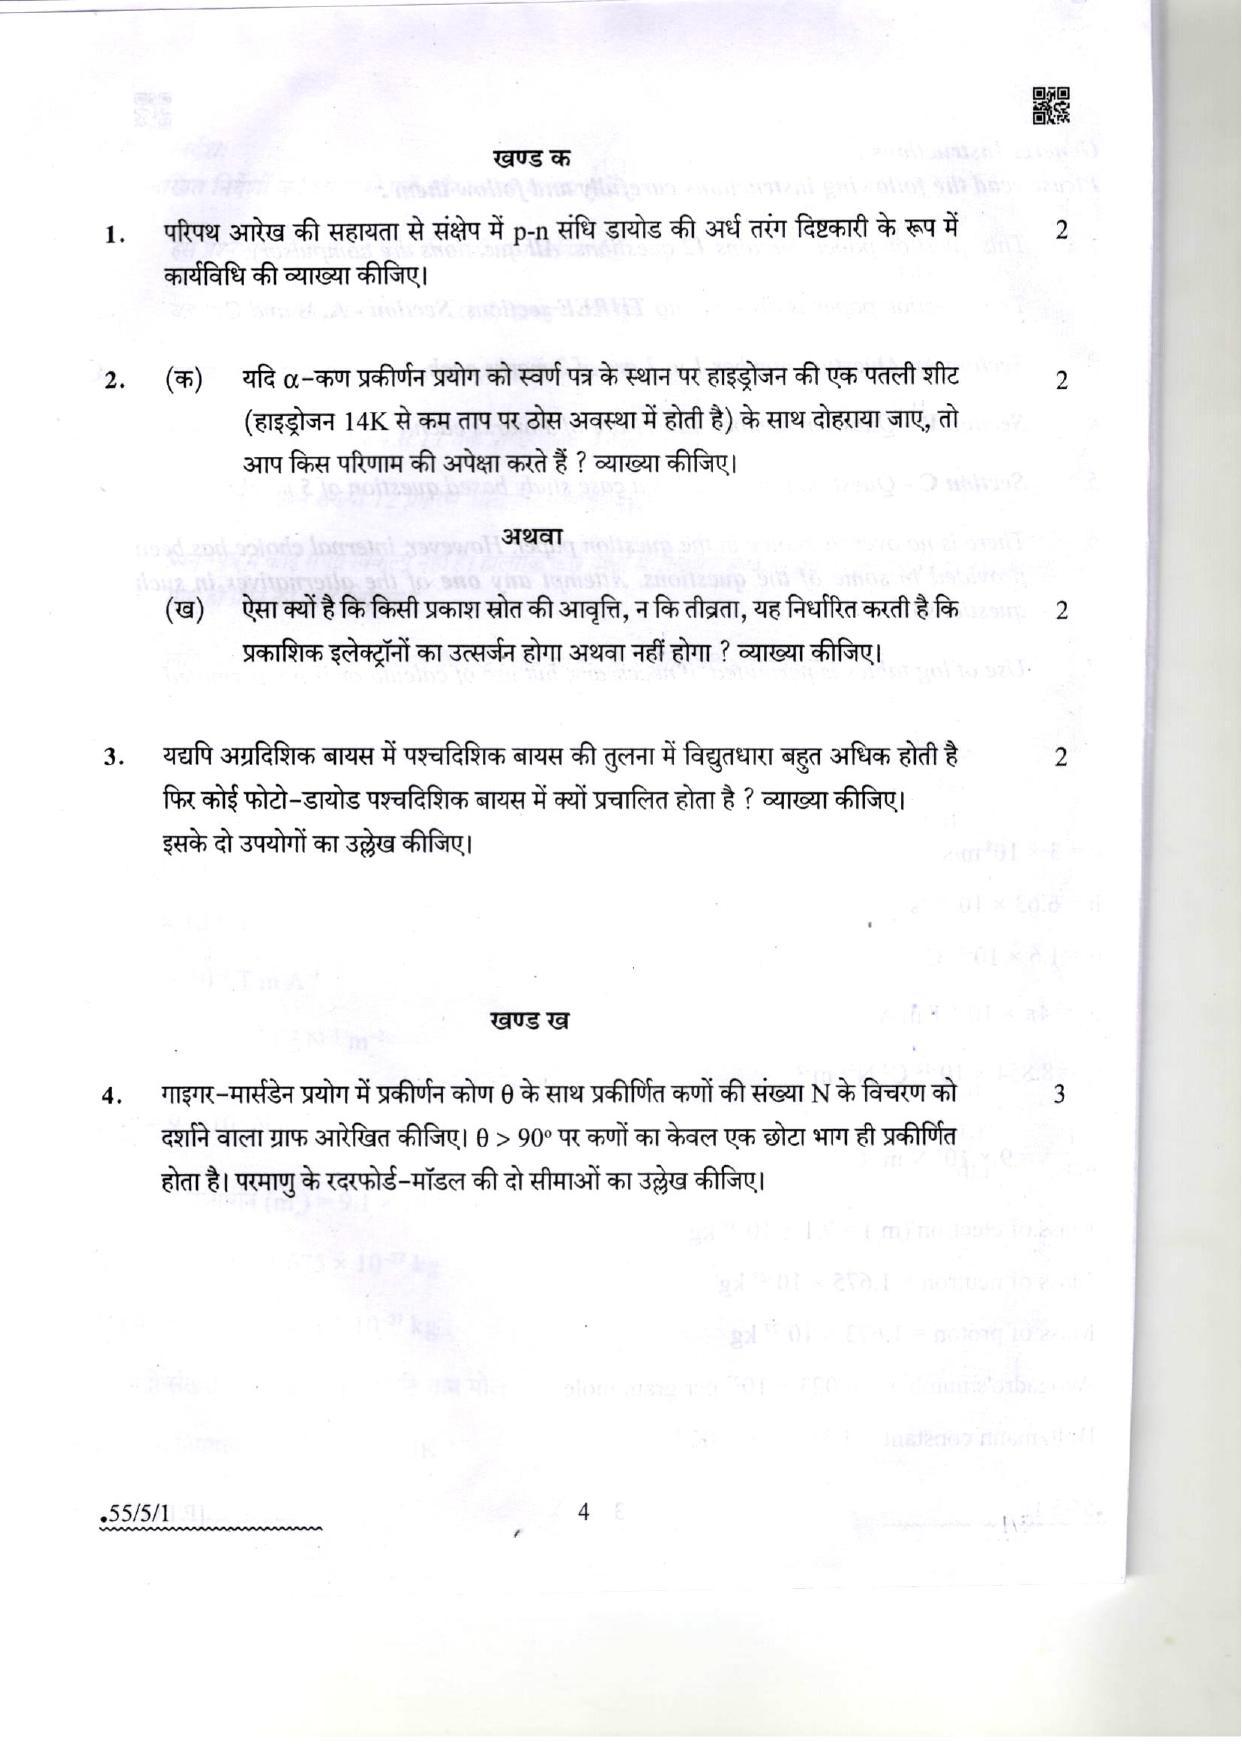 CBSE Class 12 55-5-1 Physics 2022 Question Paper - Page 4